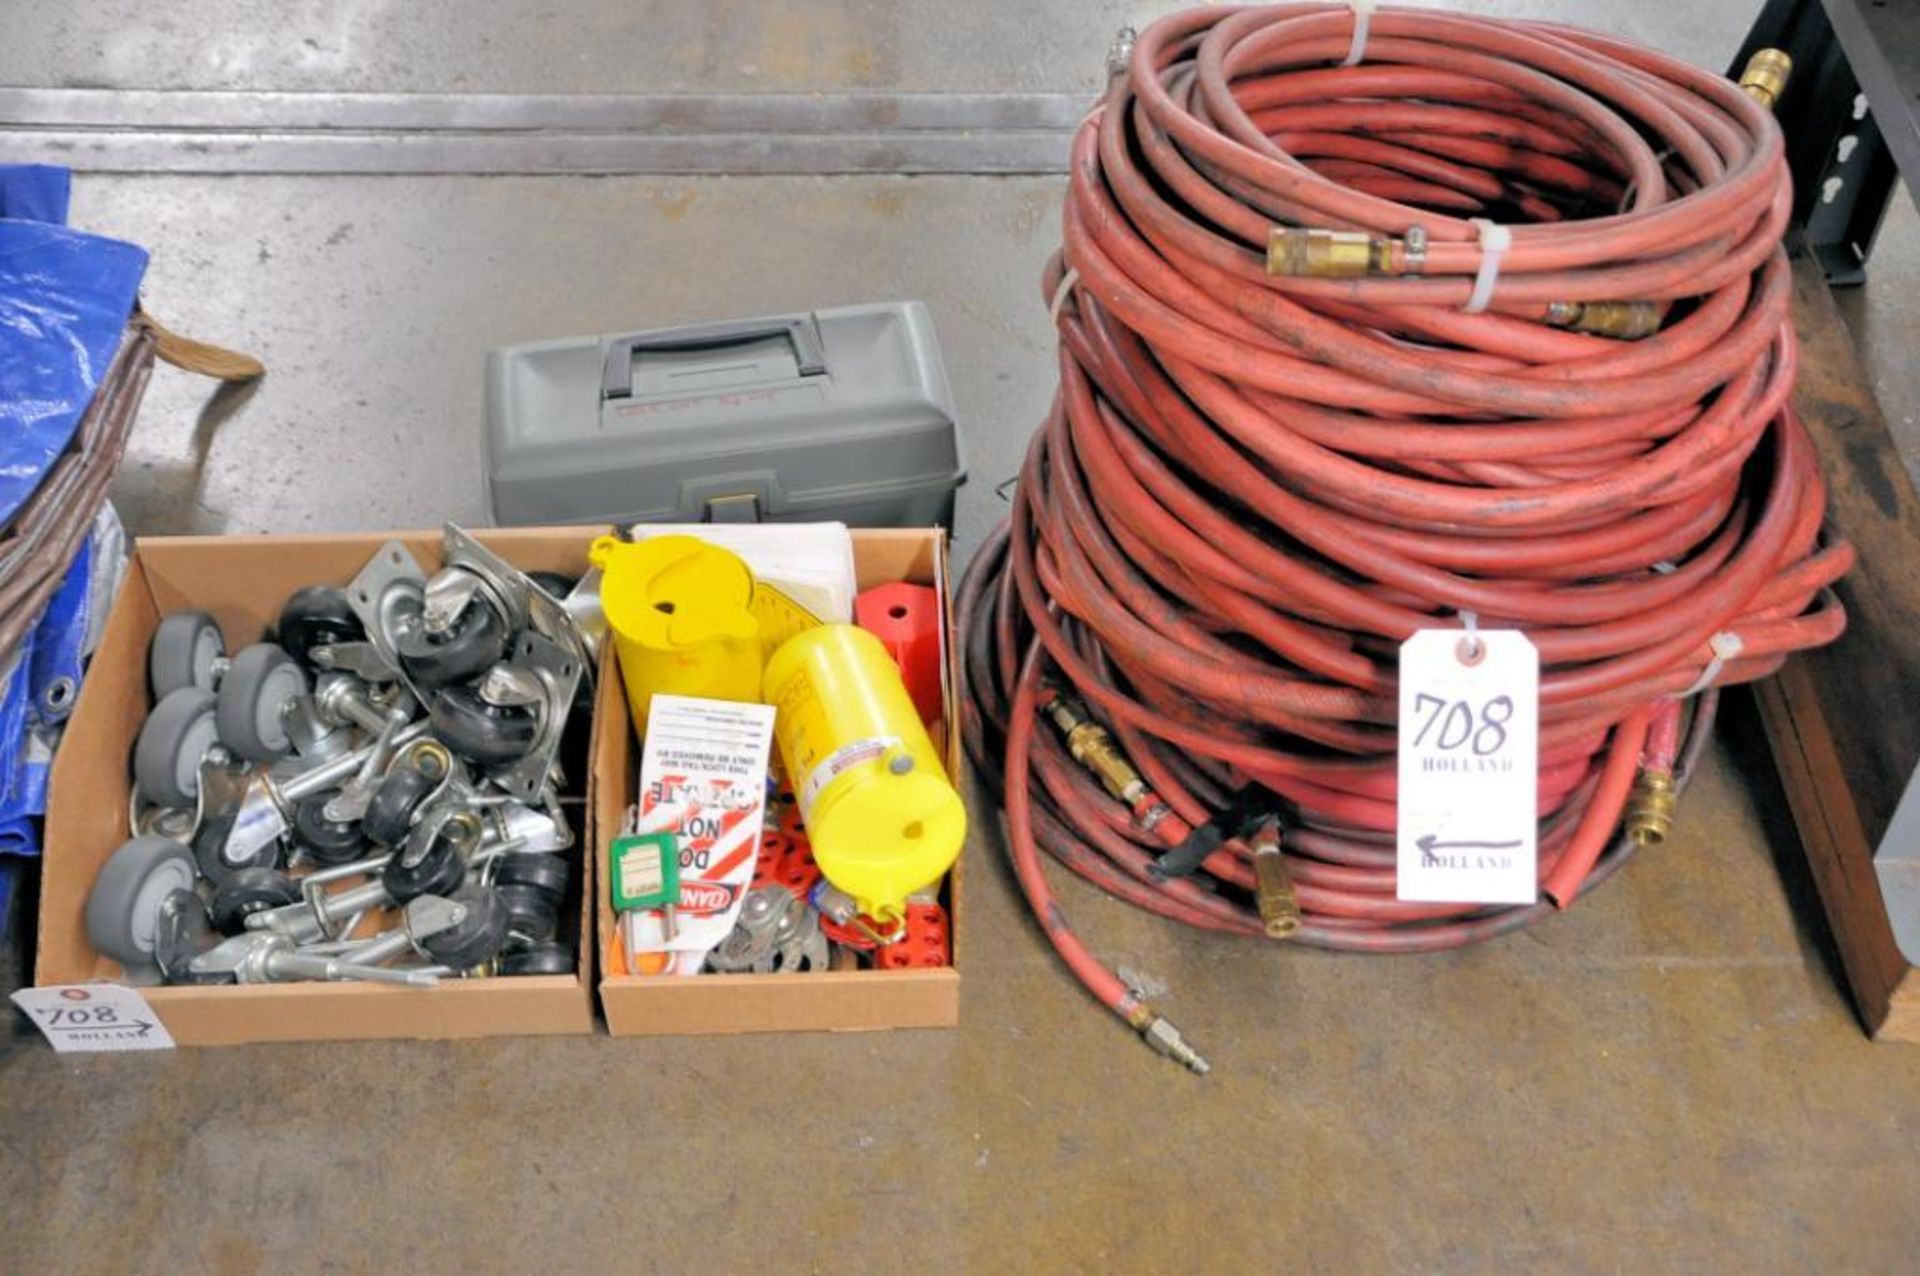 Lot - Air Hose in (1) Stack with Caster Wheels and Lockout/Tagout in (2) Boxes